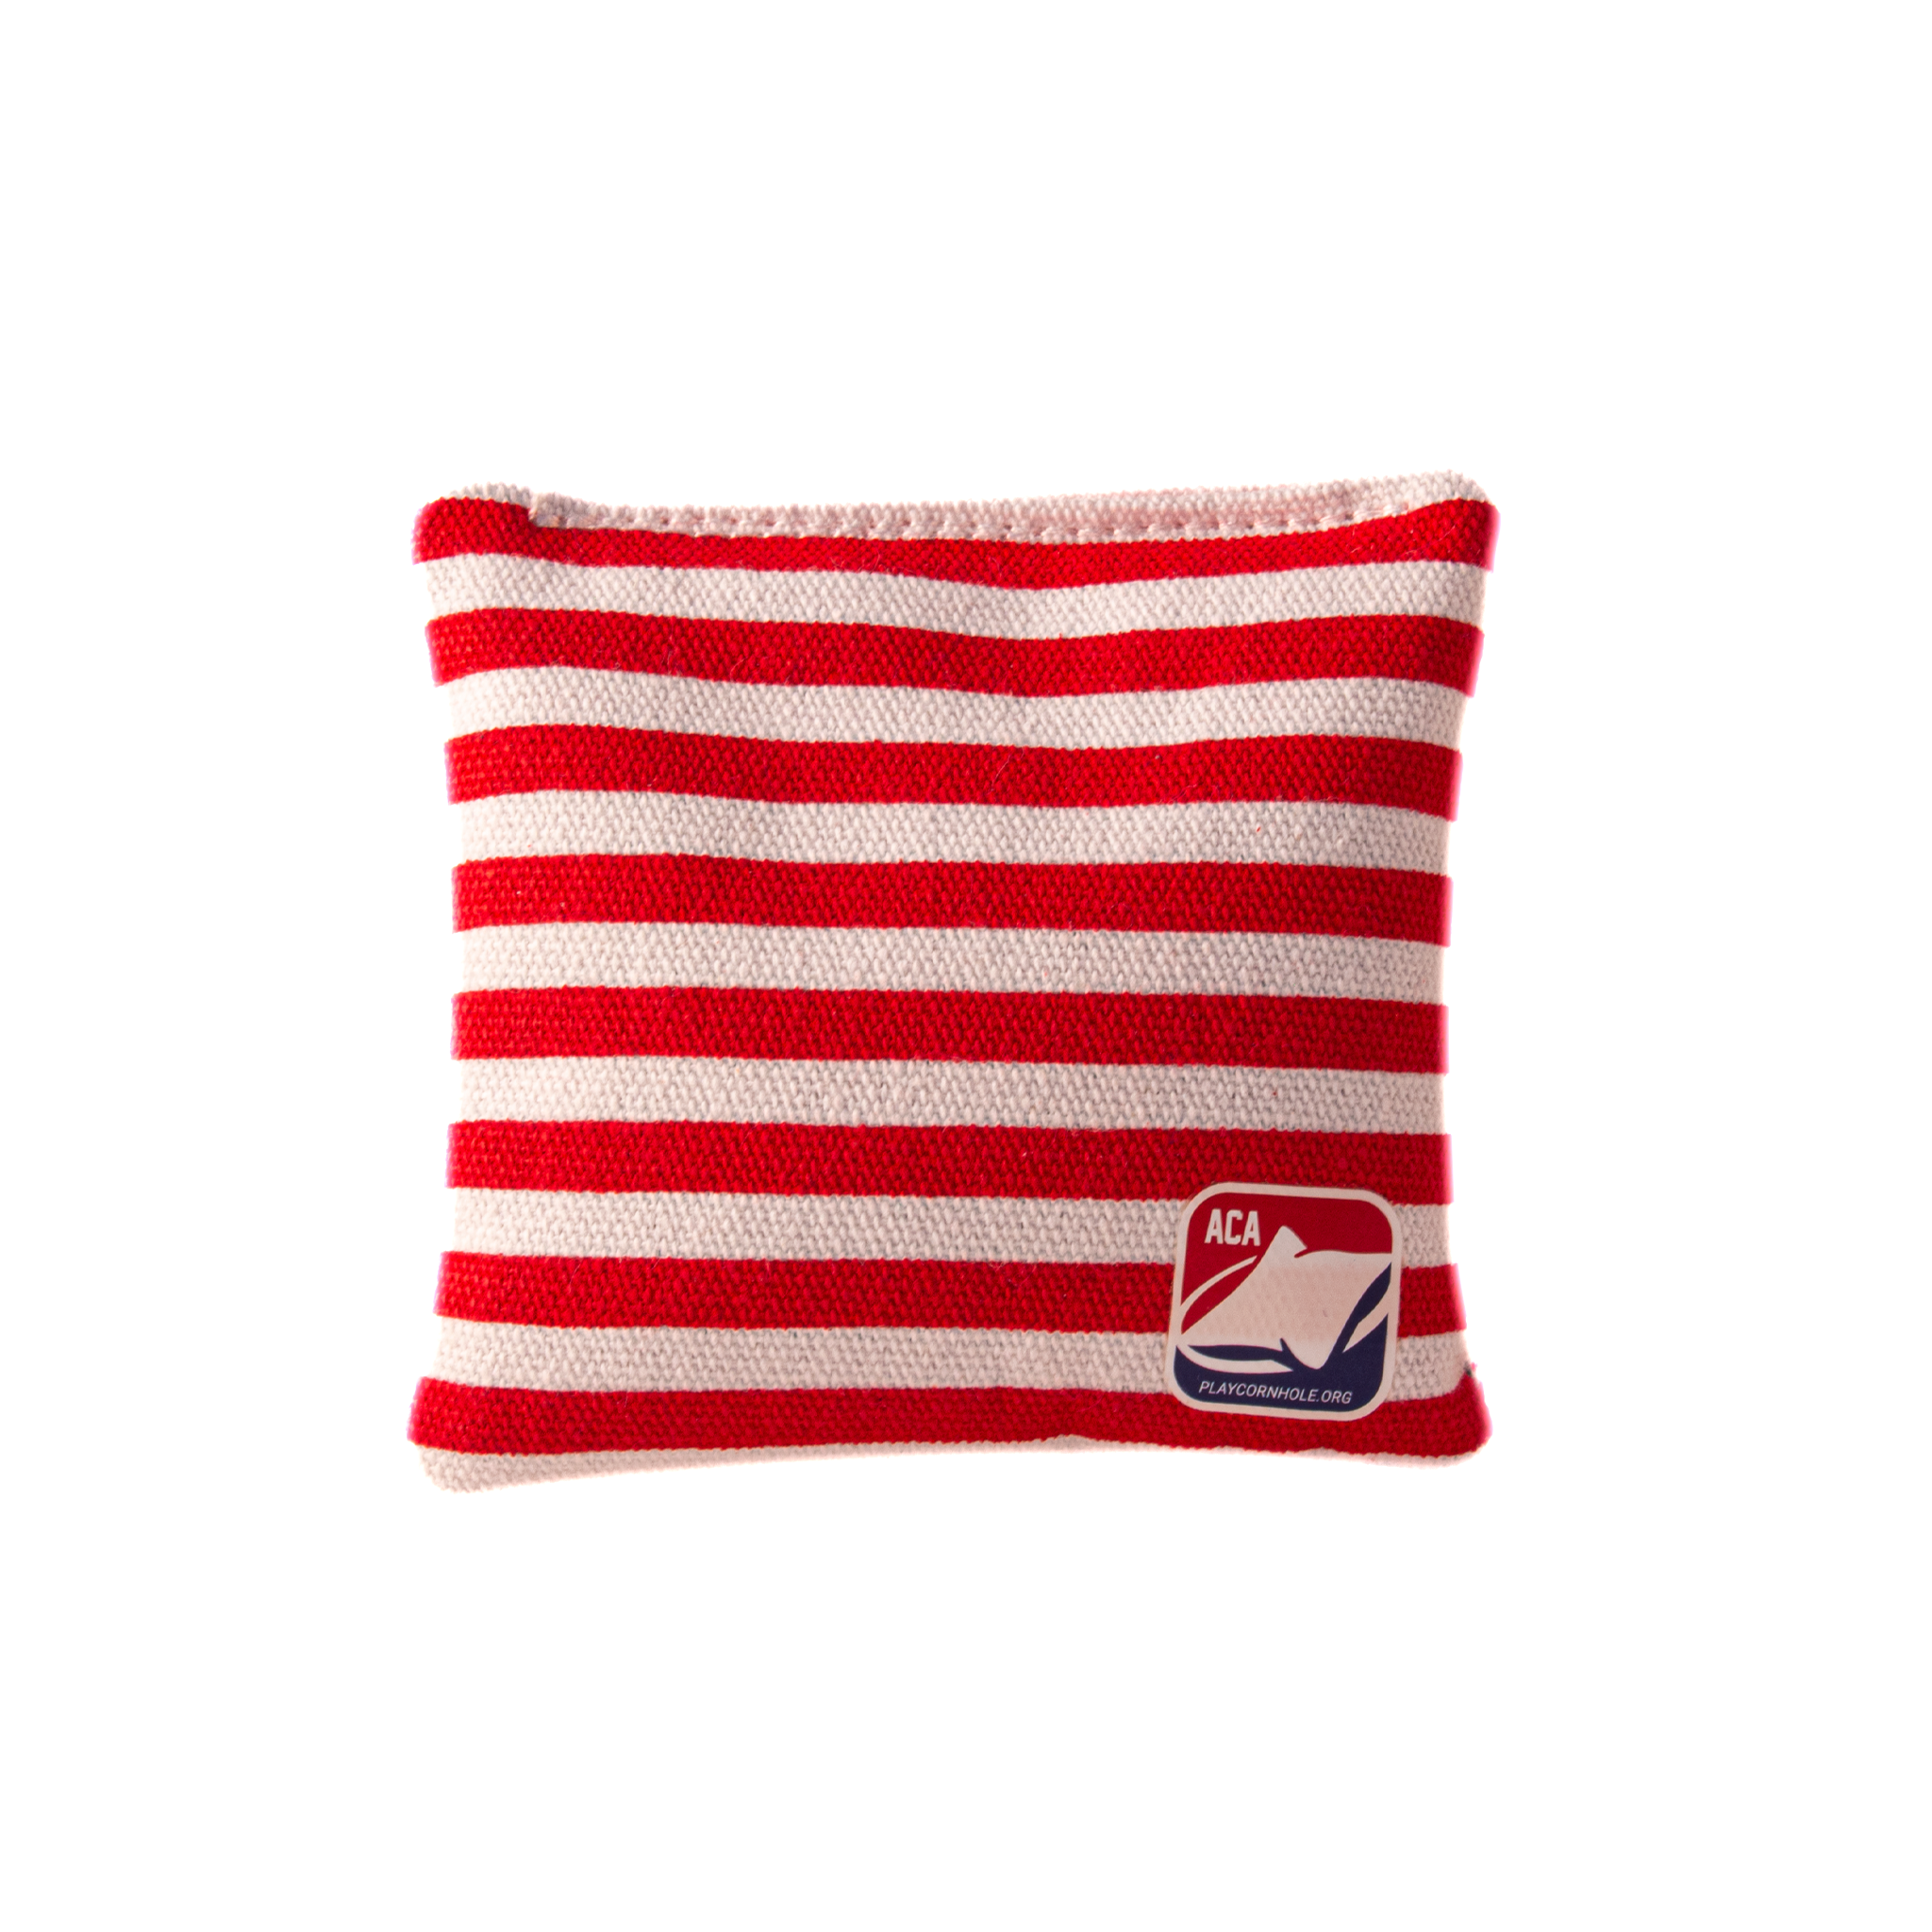 4-in Daily 44x Stripes Recreational Cornhole Bags